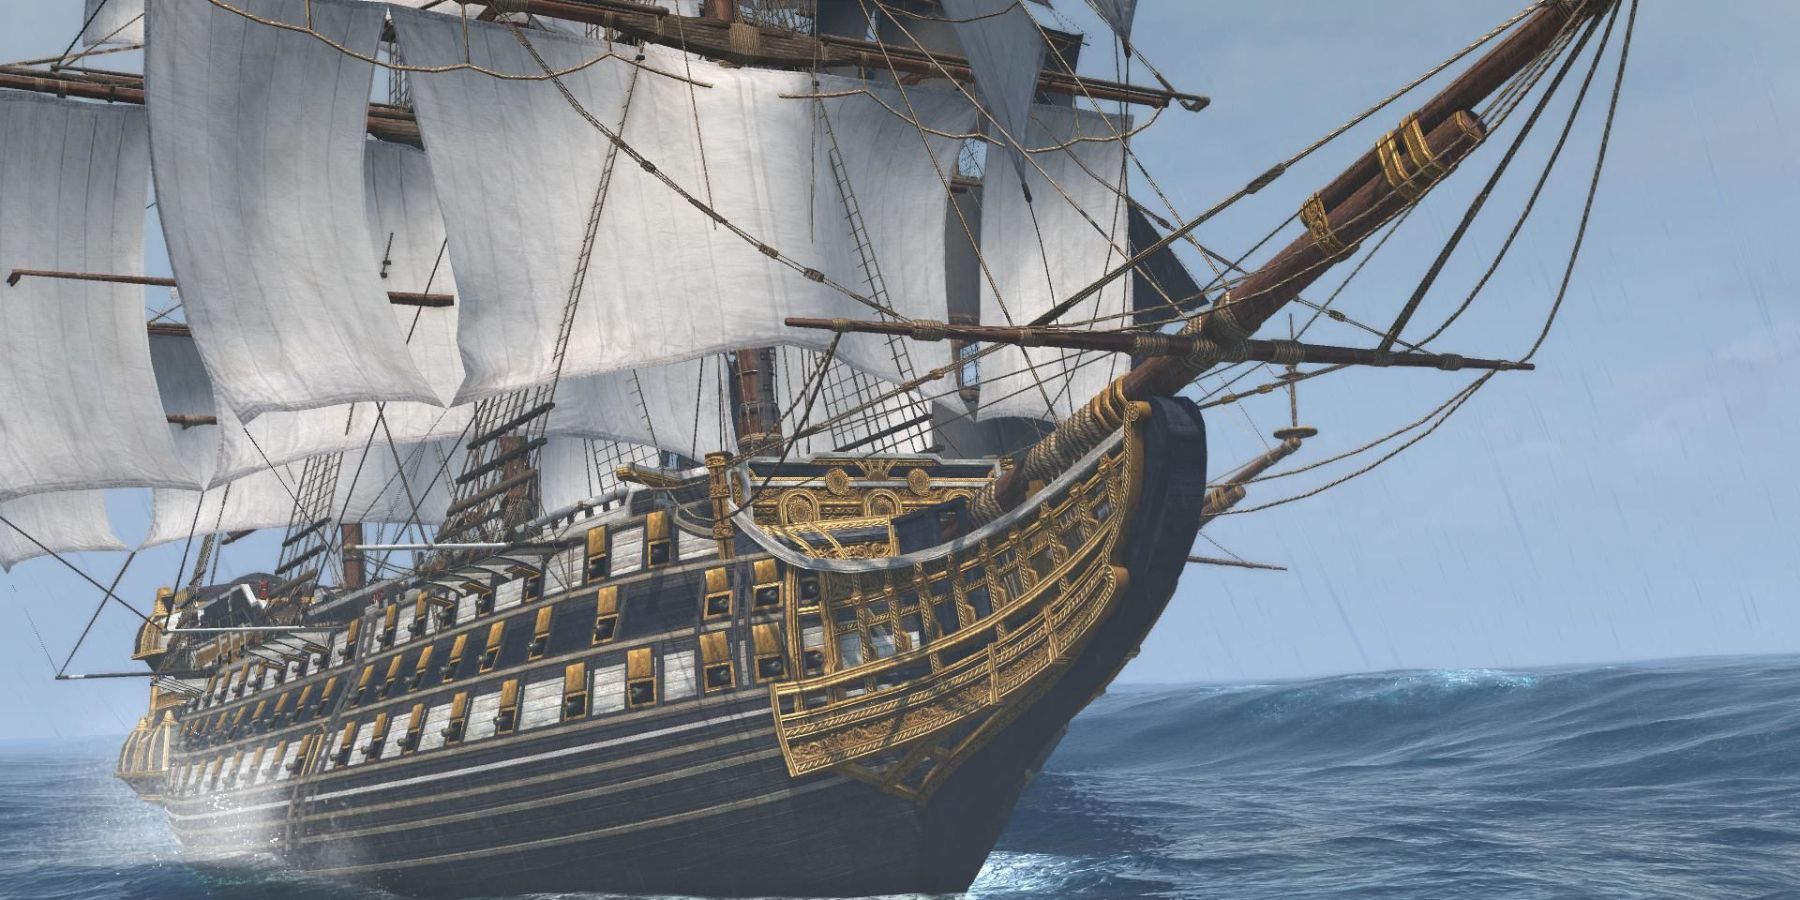 Cut scene of the player's ship on AC Black Flag